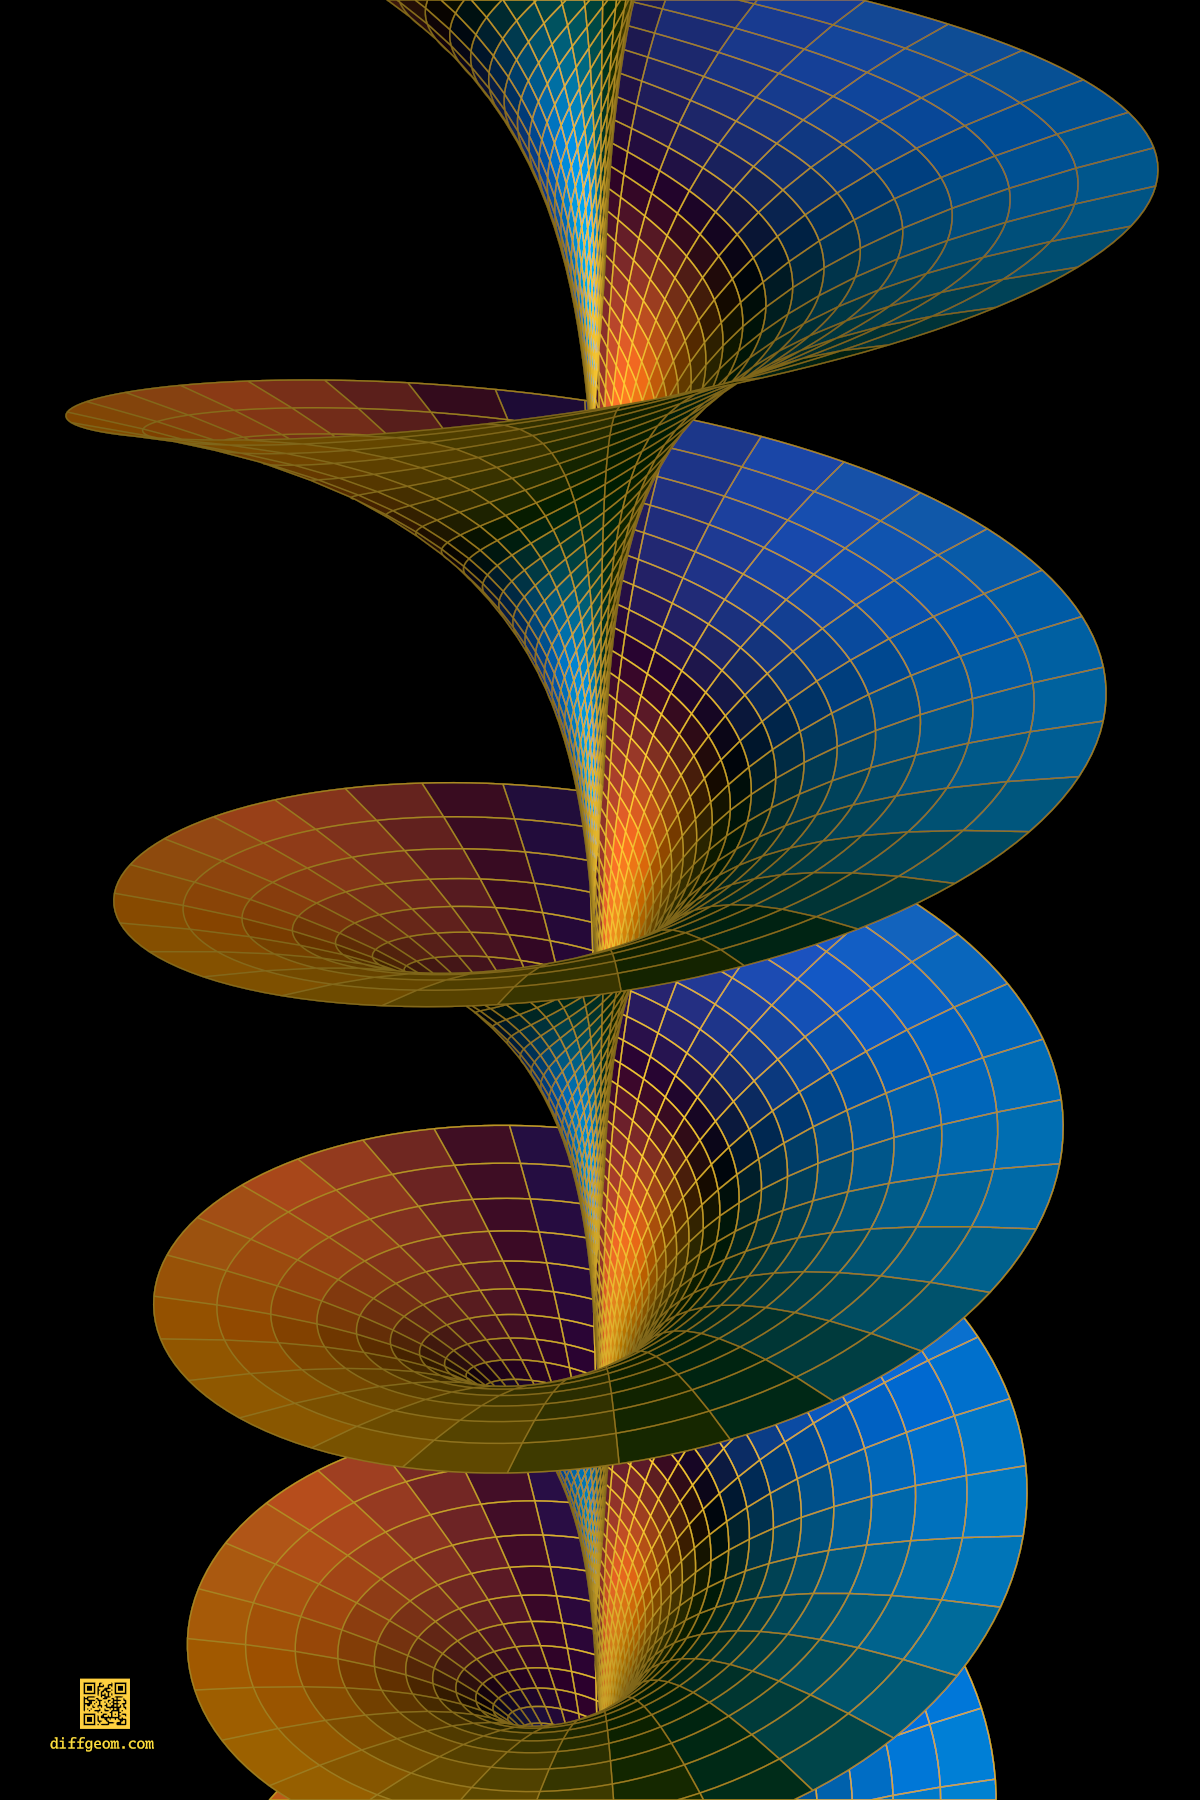 The Riemann surface of logarithm, shaded from gold to blue by domain, against a black background